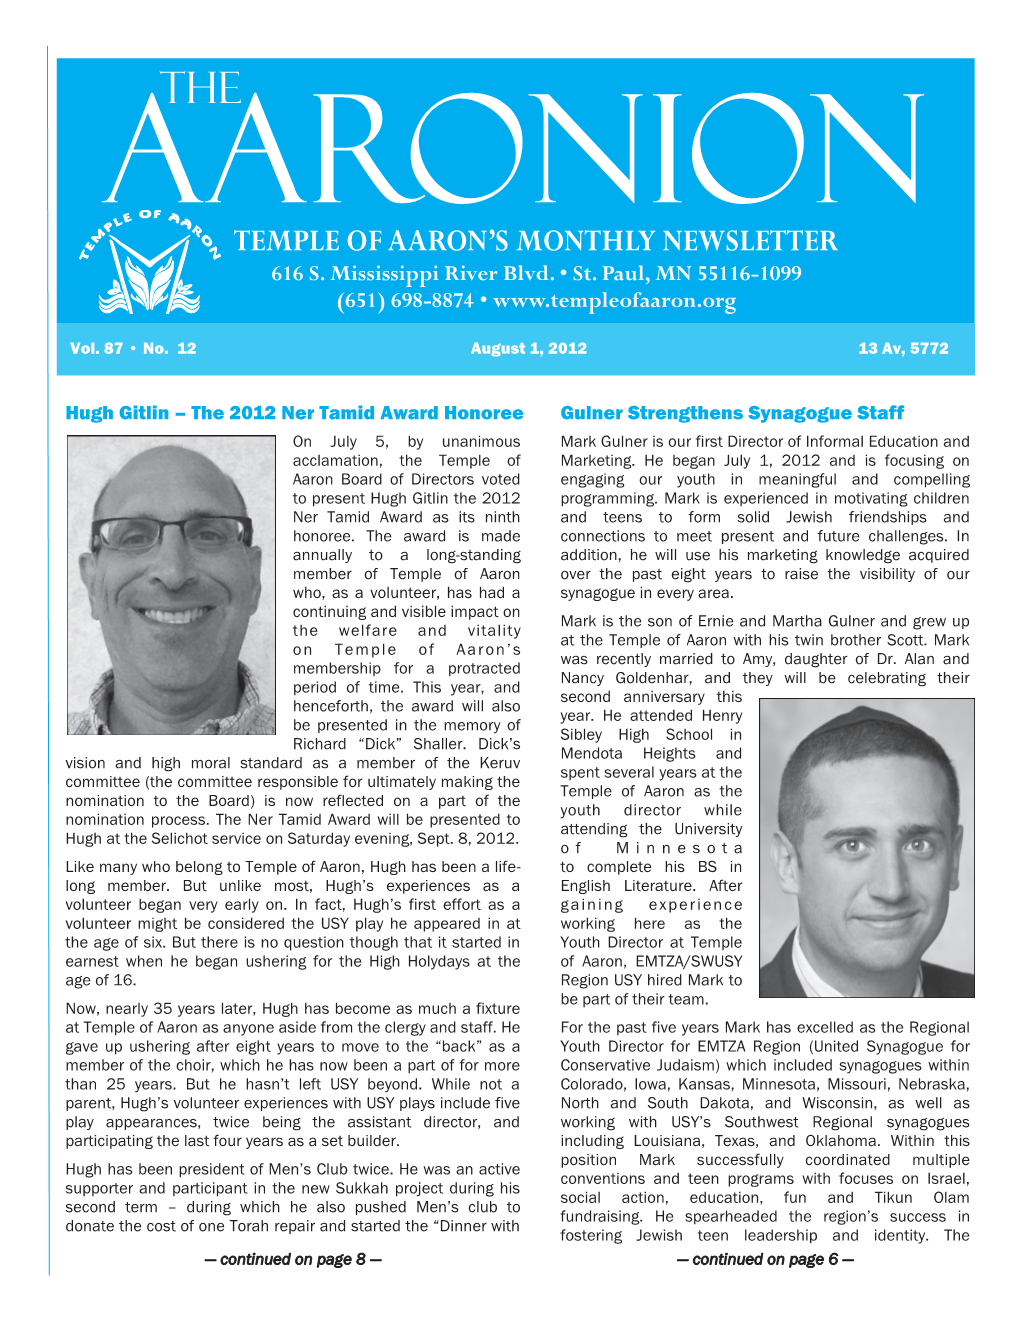 Temple of Aaron's Monthly Newsletter